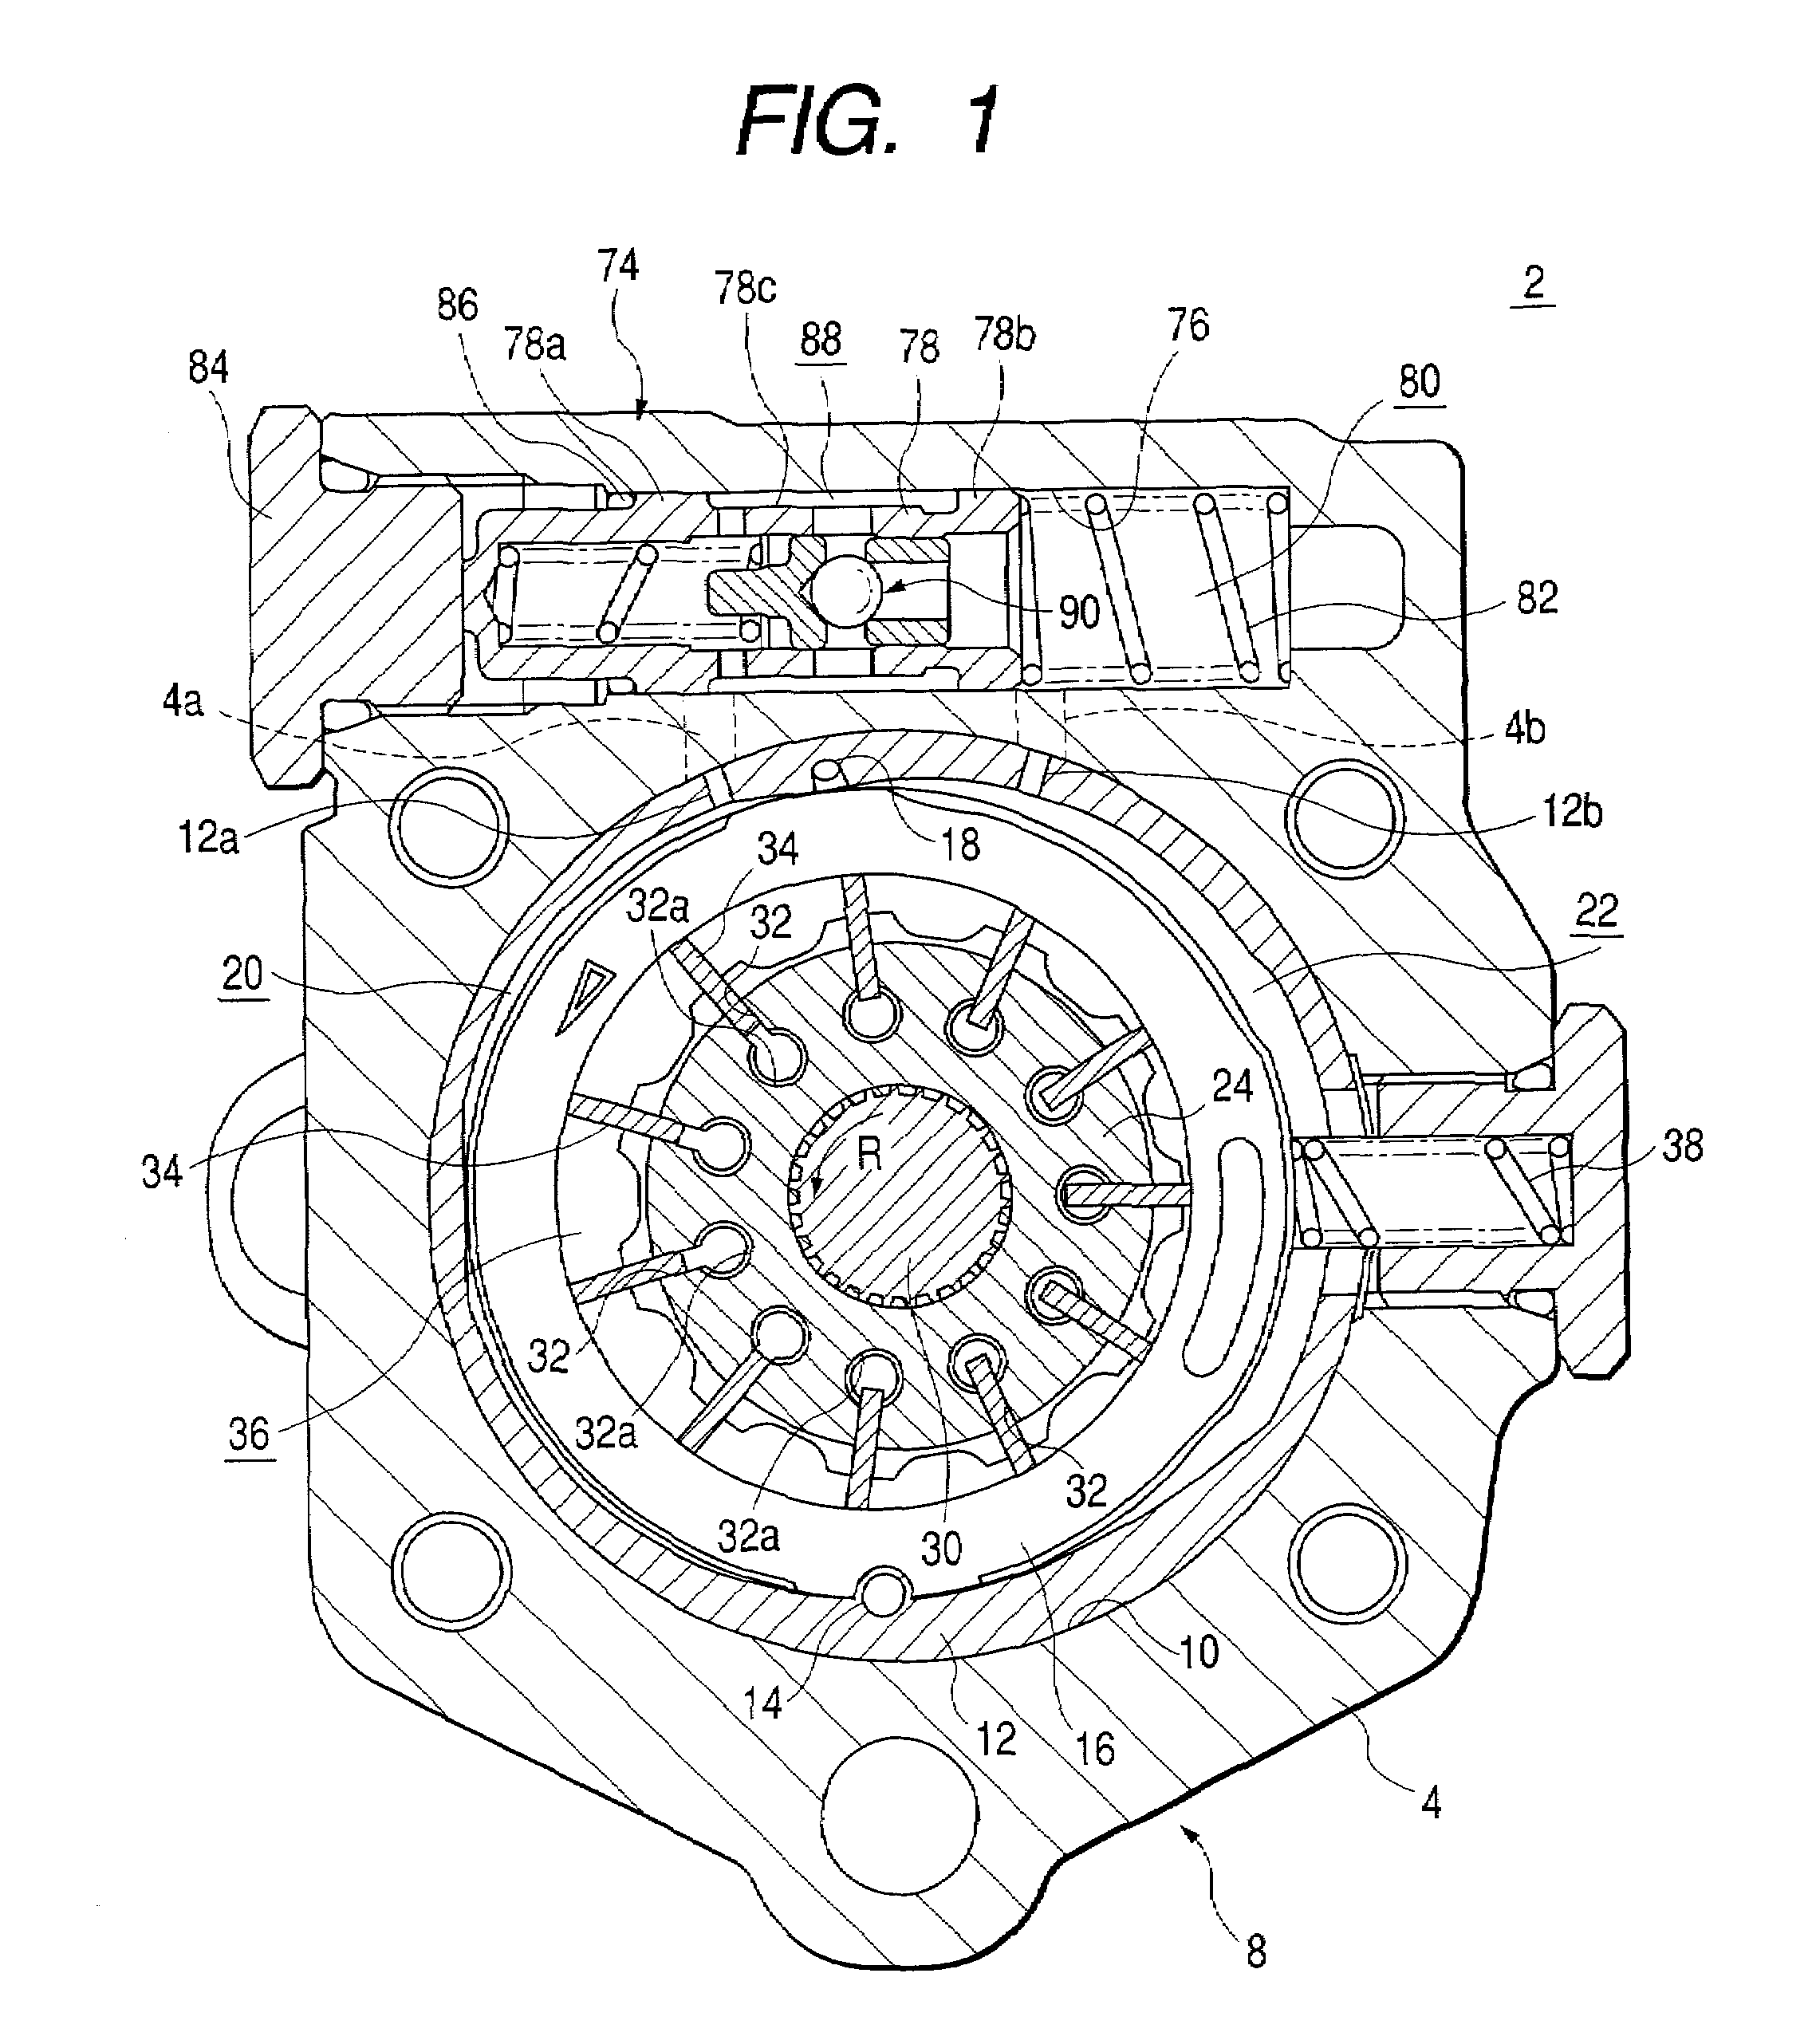 Variable displacement pump with a suction area groove for pushing out rotor vanes